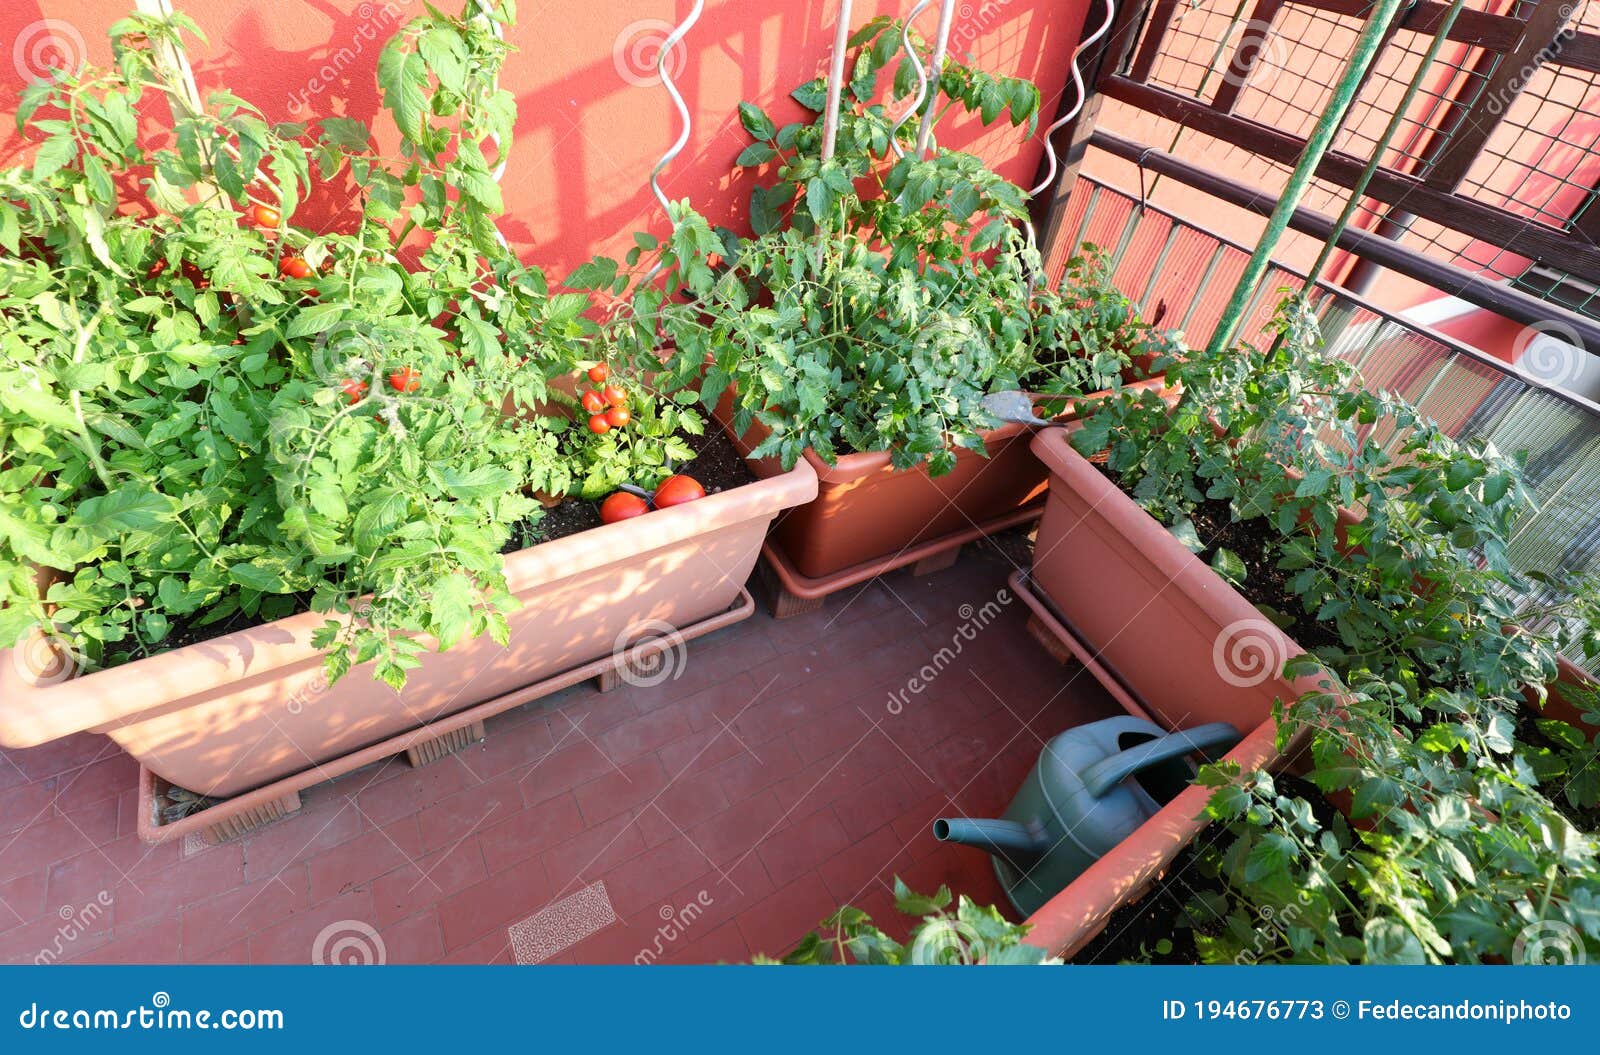 house with an urban vegetable garden and flower pots with tomato